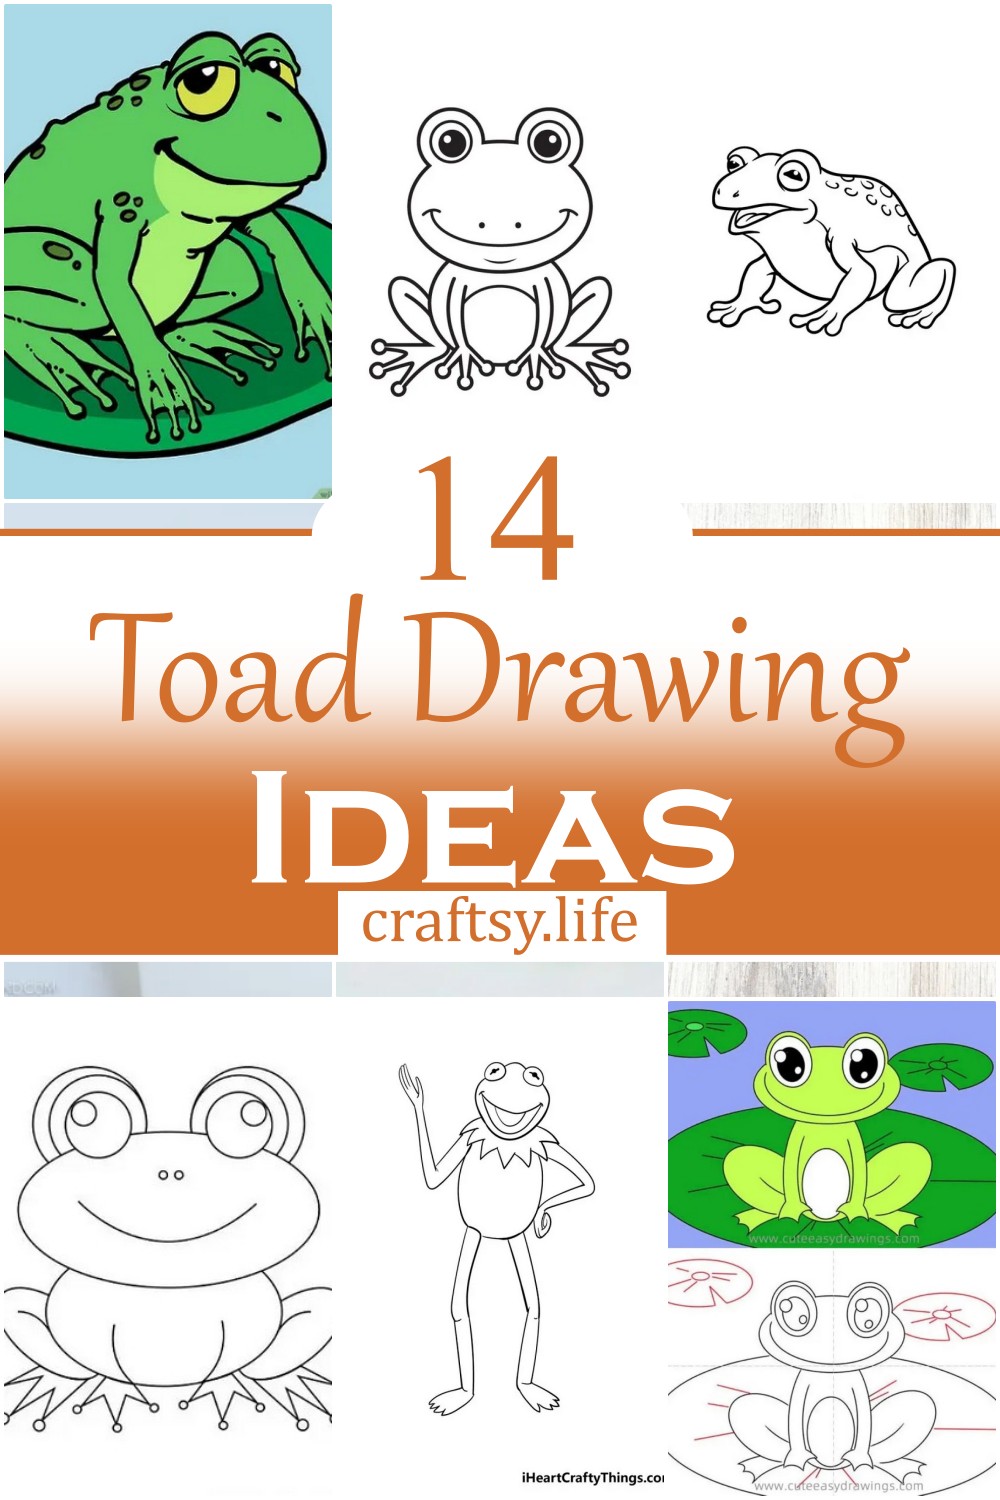 Toad Drawing Ideas